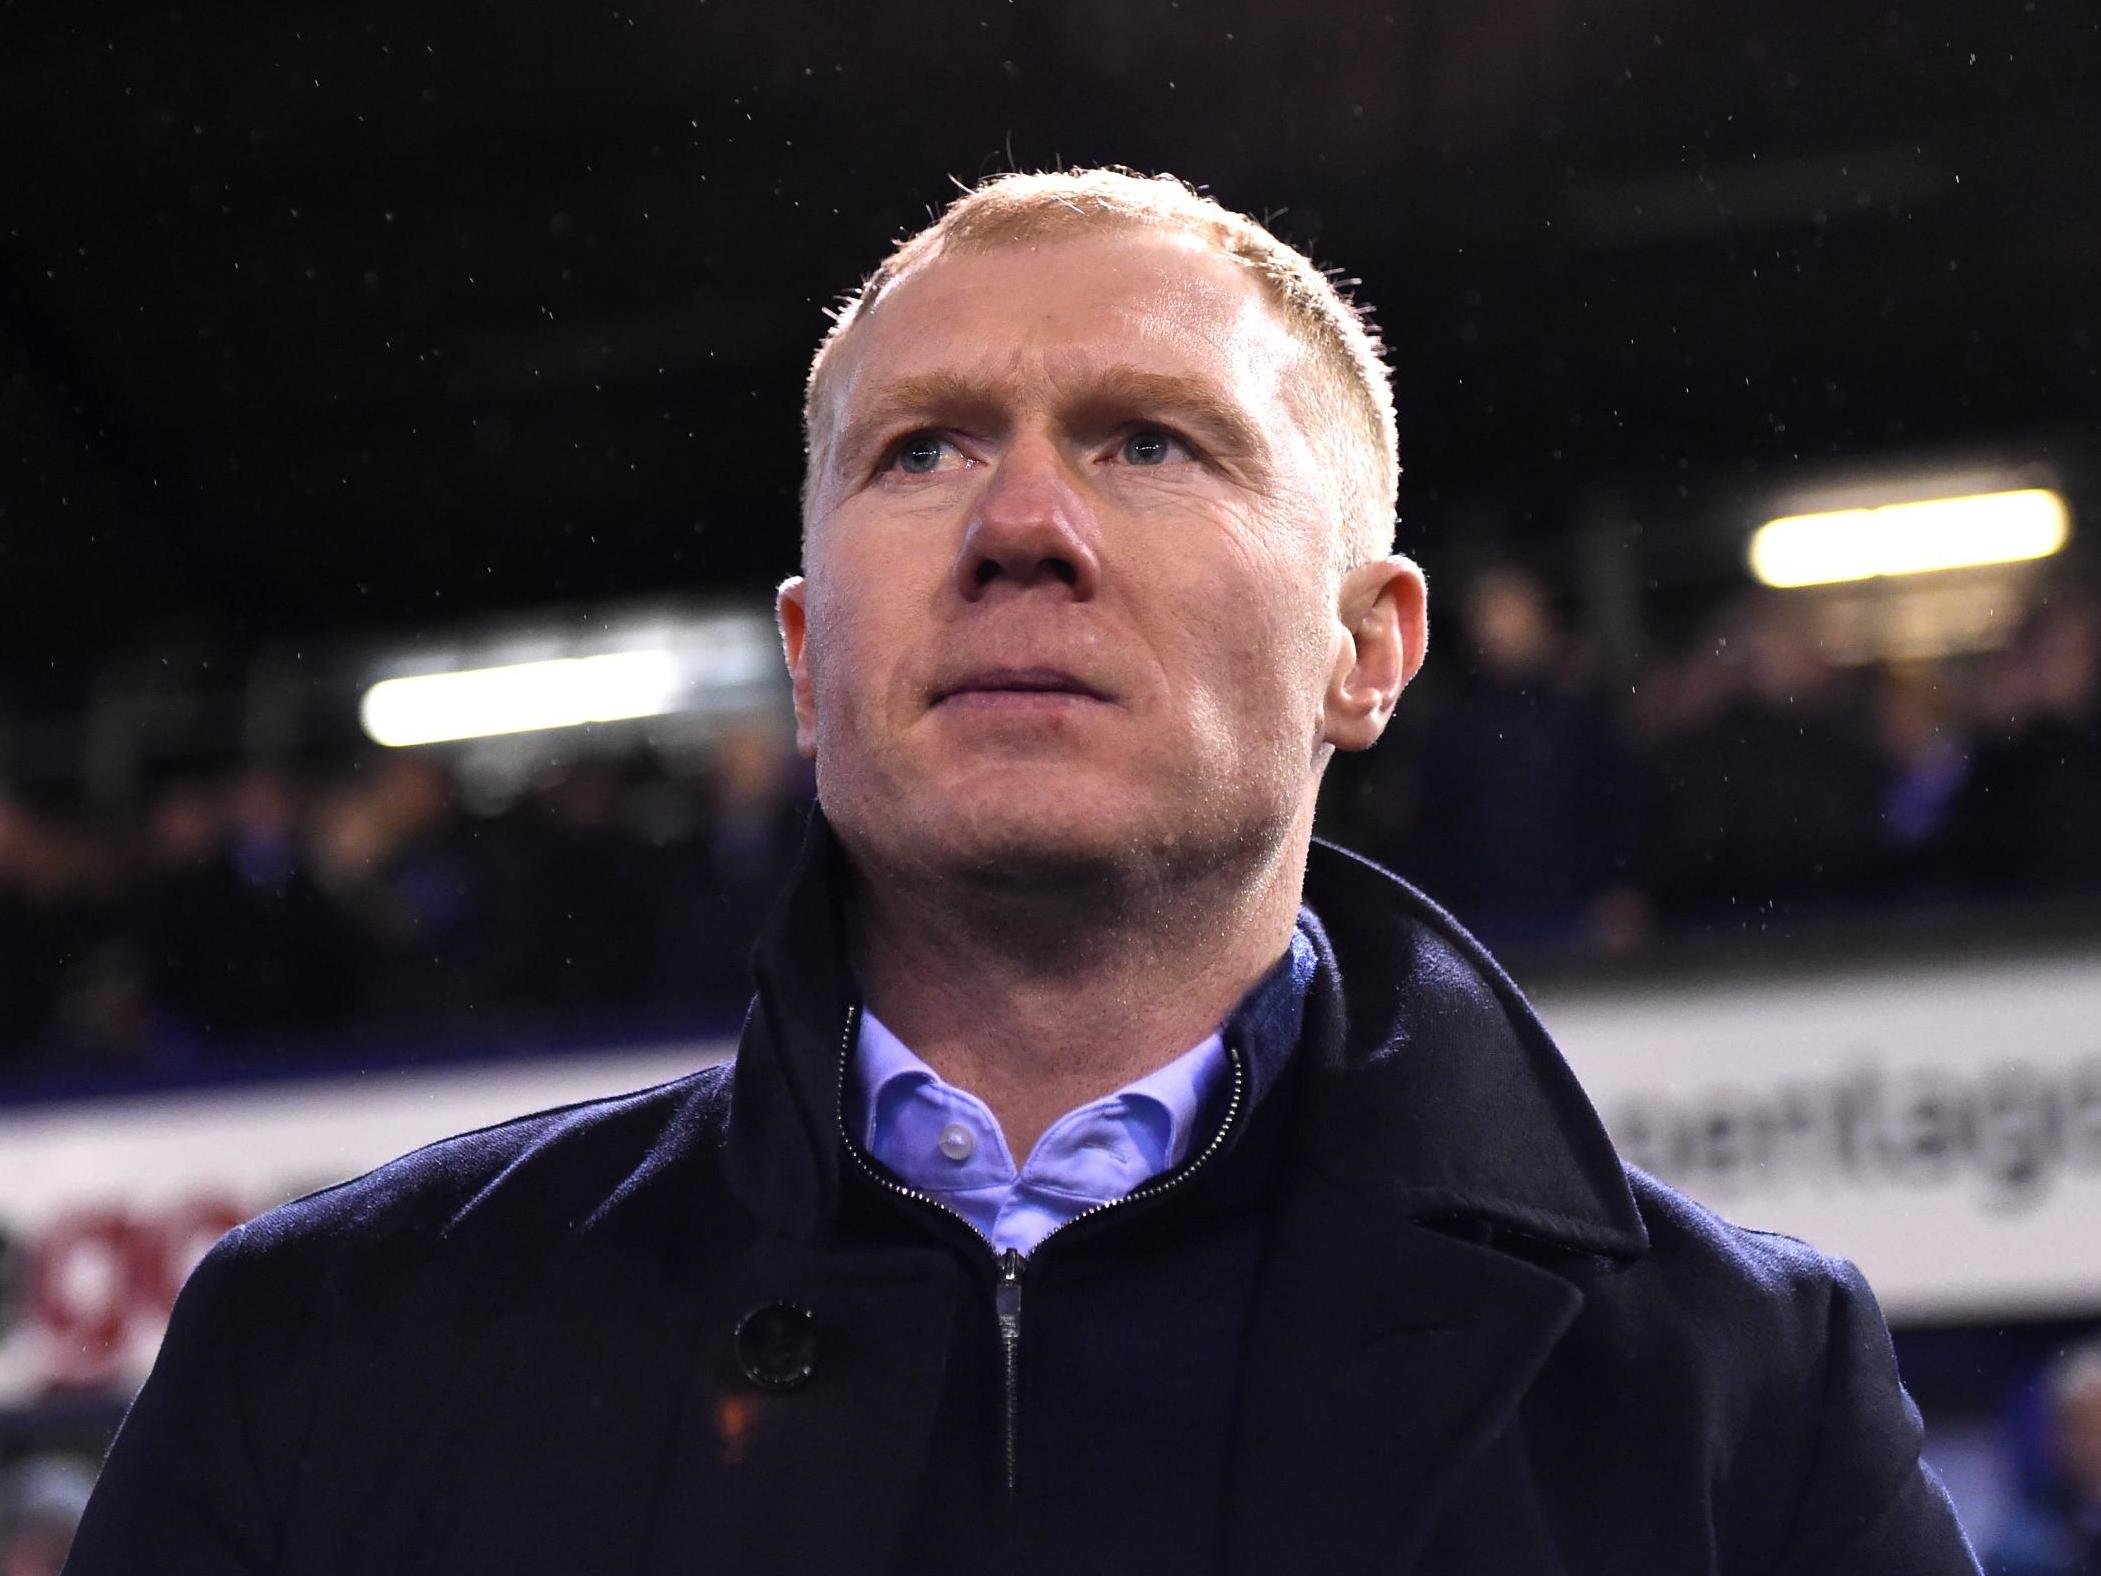 Paul Scholes apologises after £8,000 fine for breaking FA betting rules at Salford City